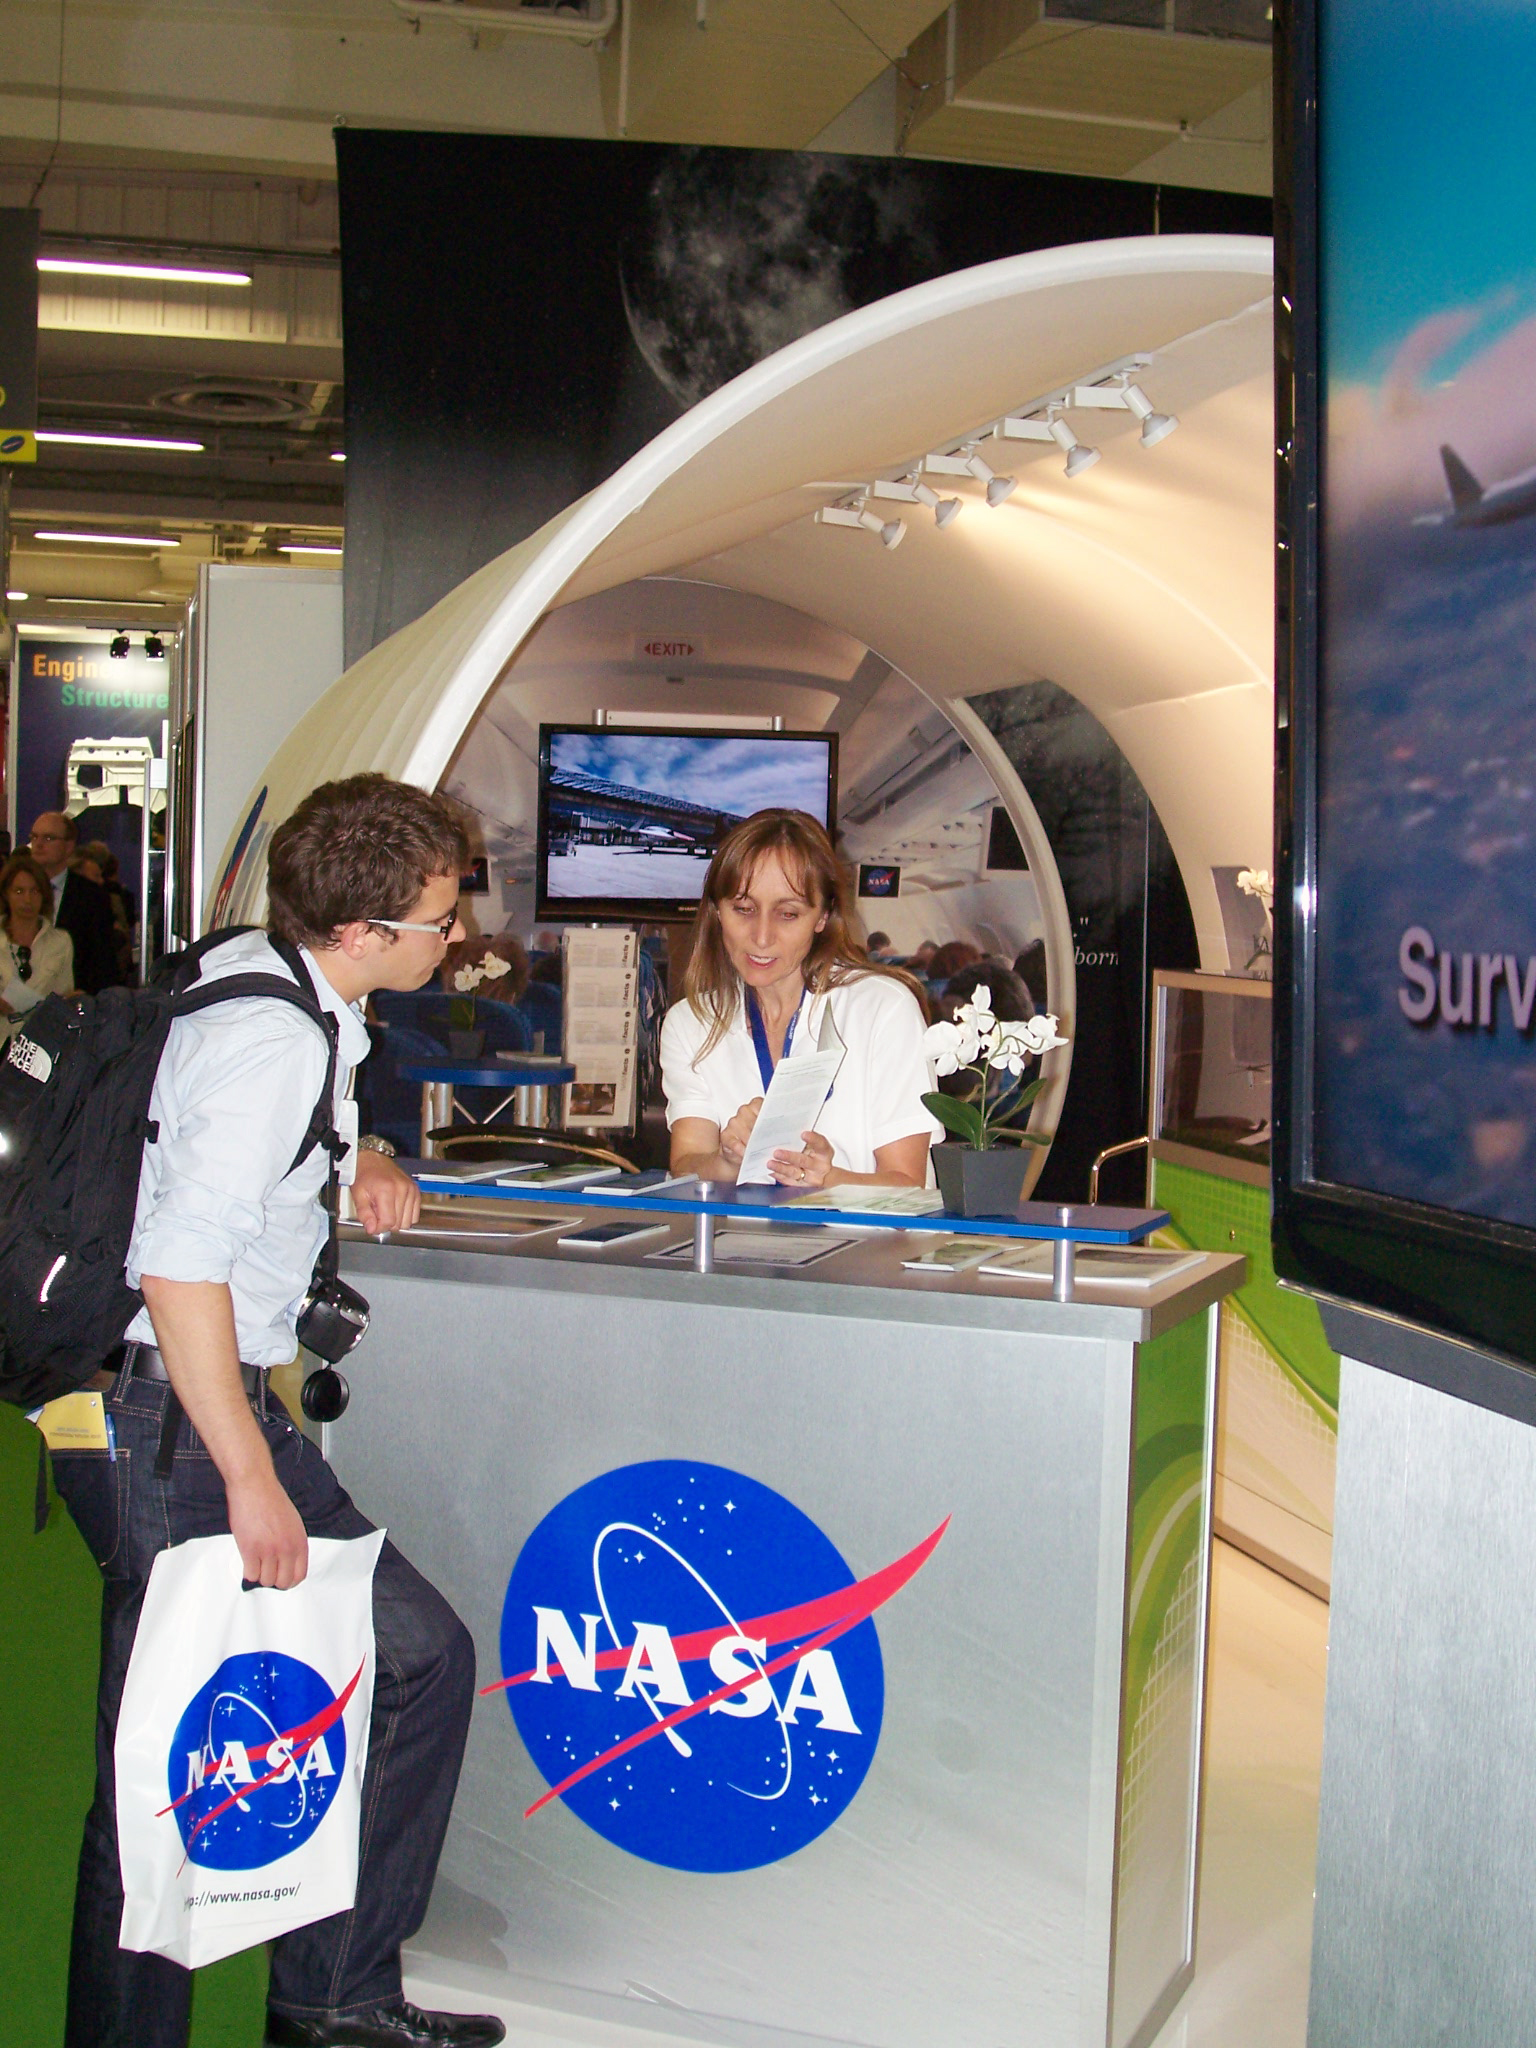 NASA personnel speaking with a member of the public at the NASA booth.